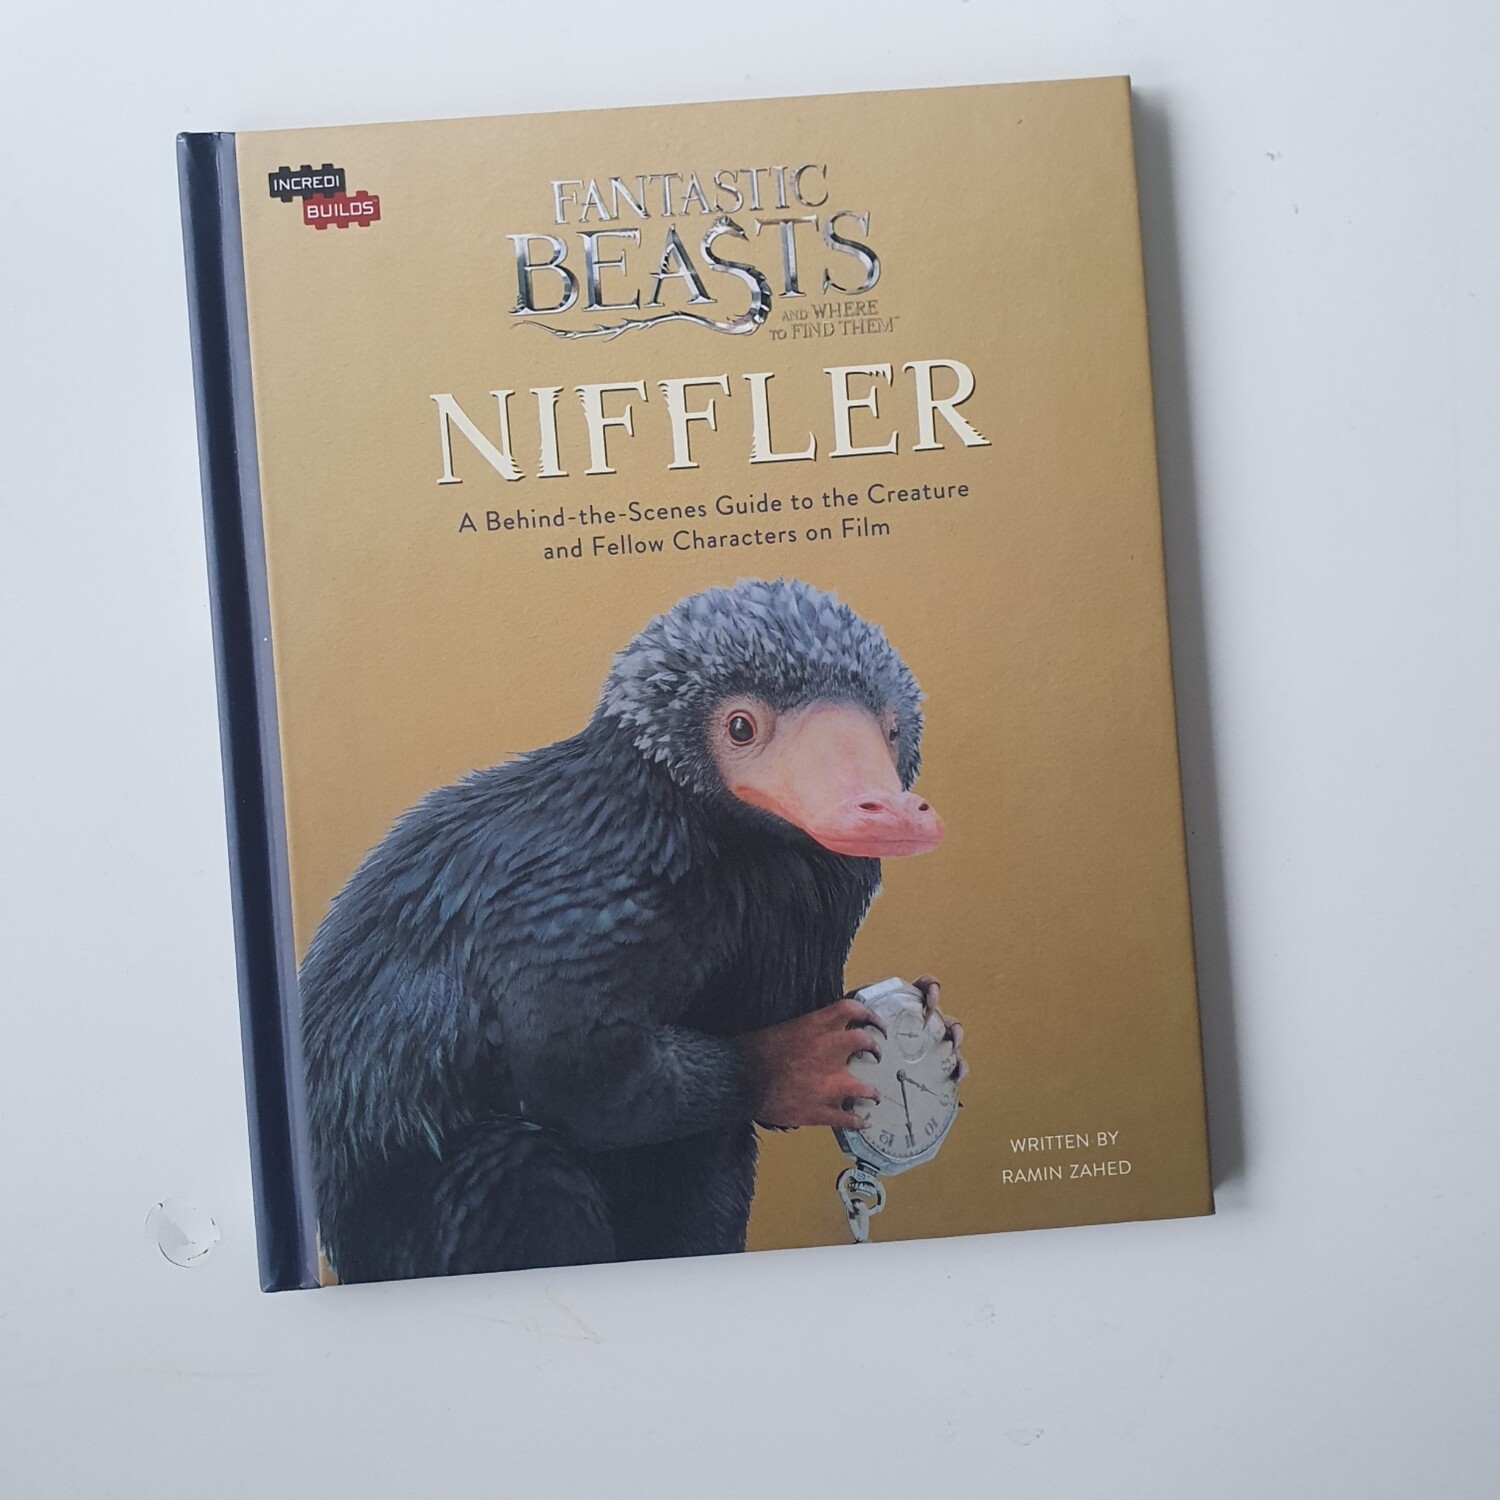 Niffler - Fantastic Beasts and Where to Find Them Notebook